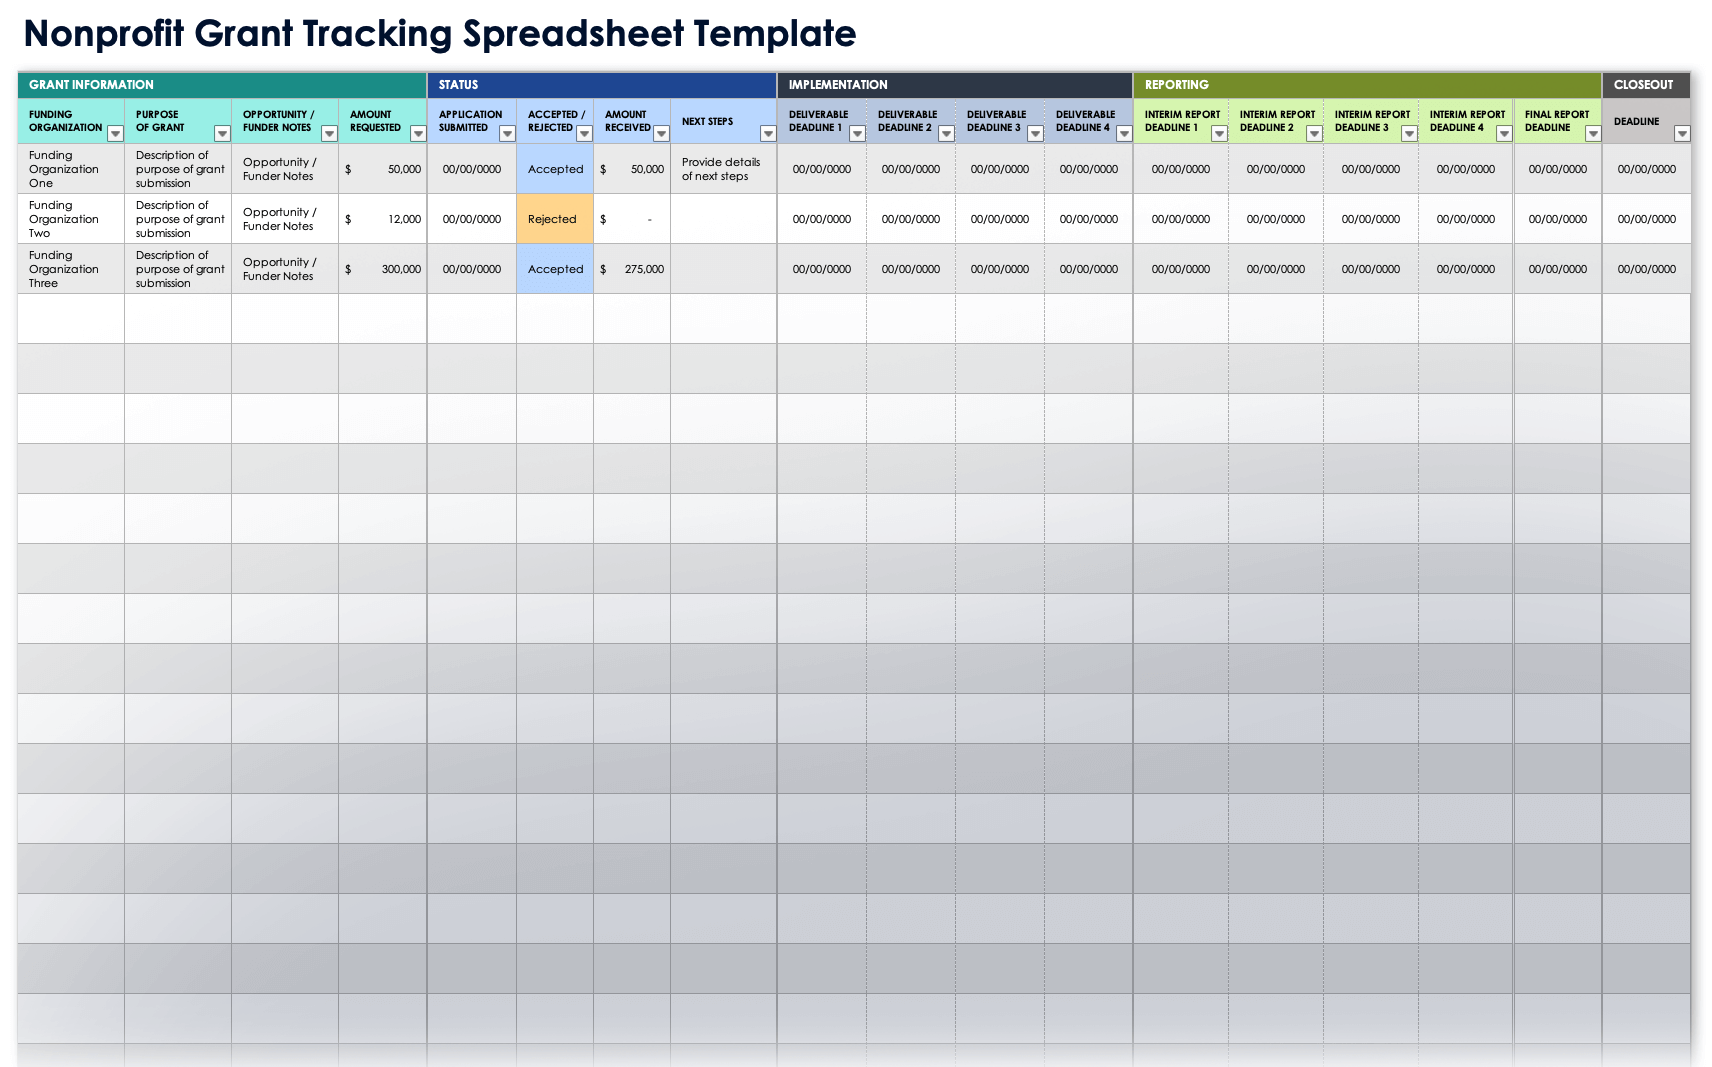 Nonprofit grant tracking spreadsheet template